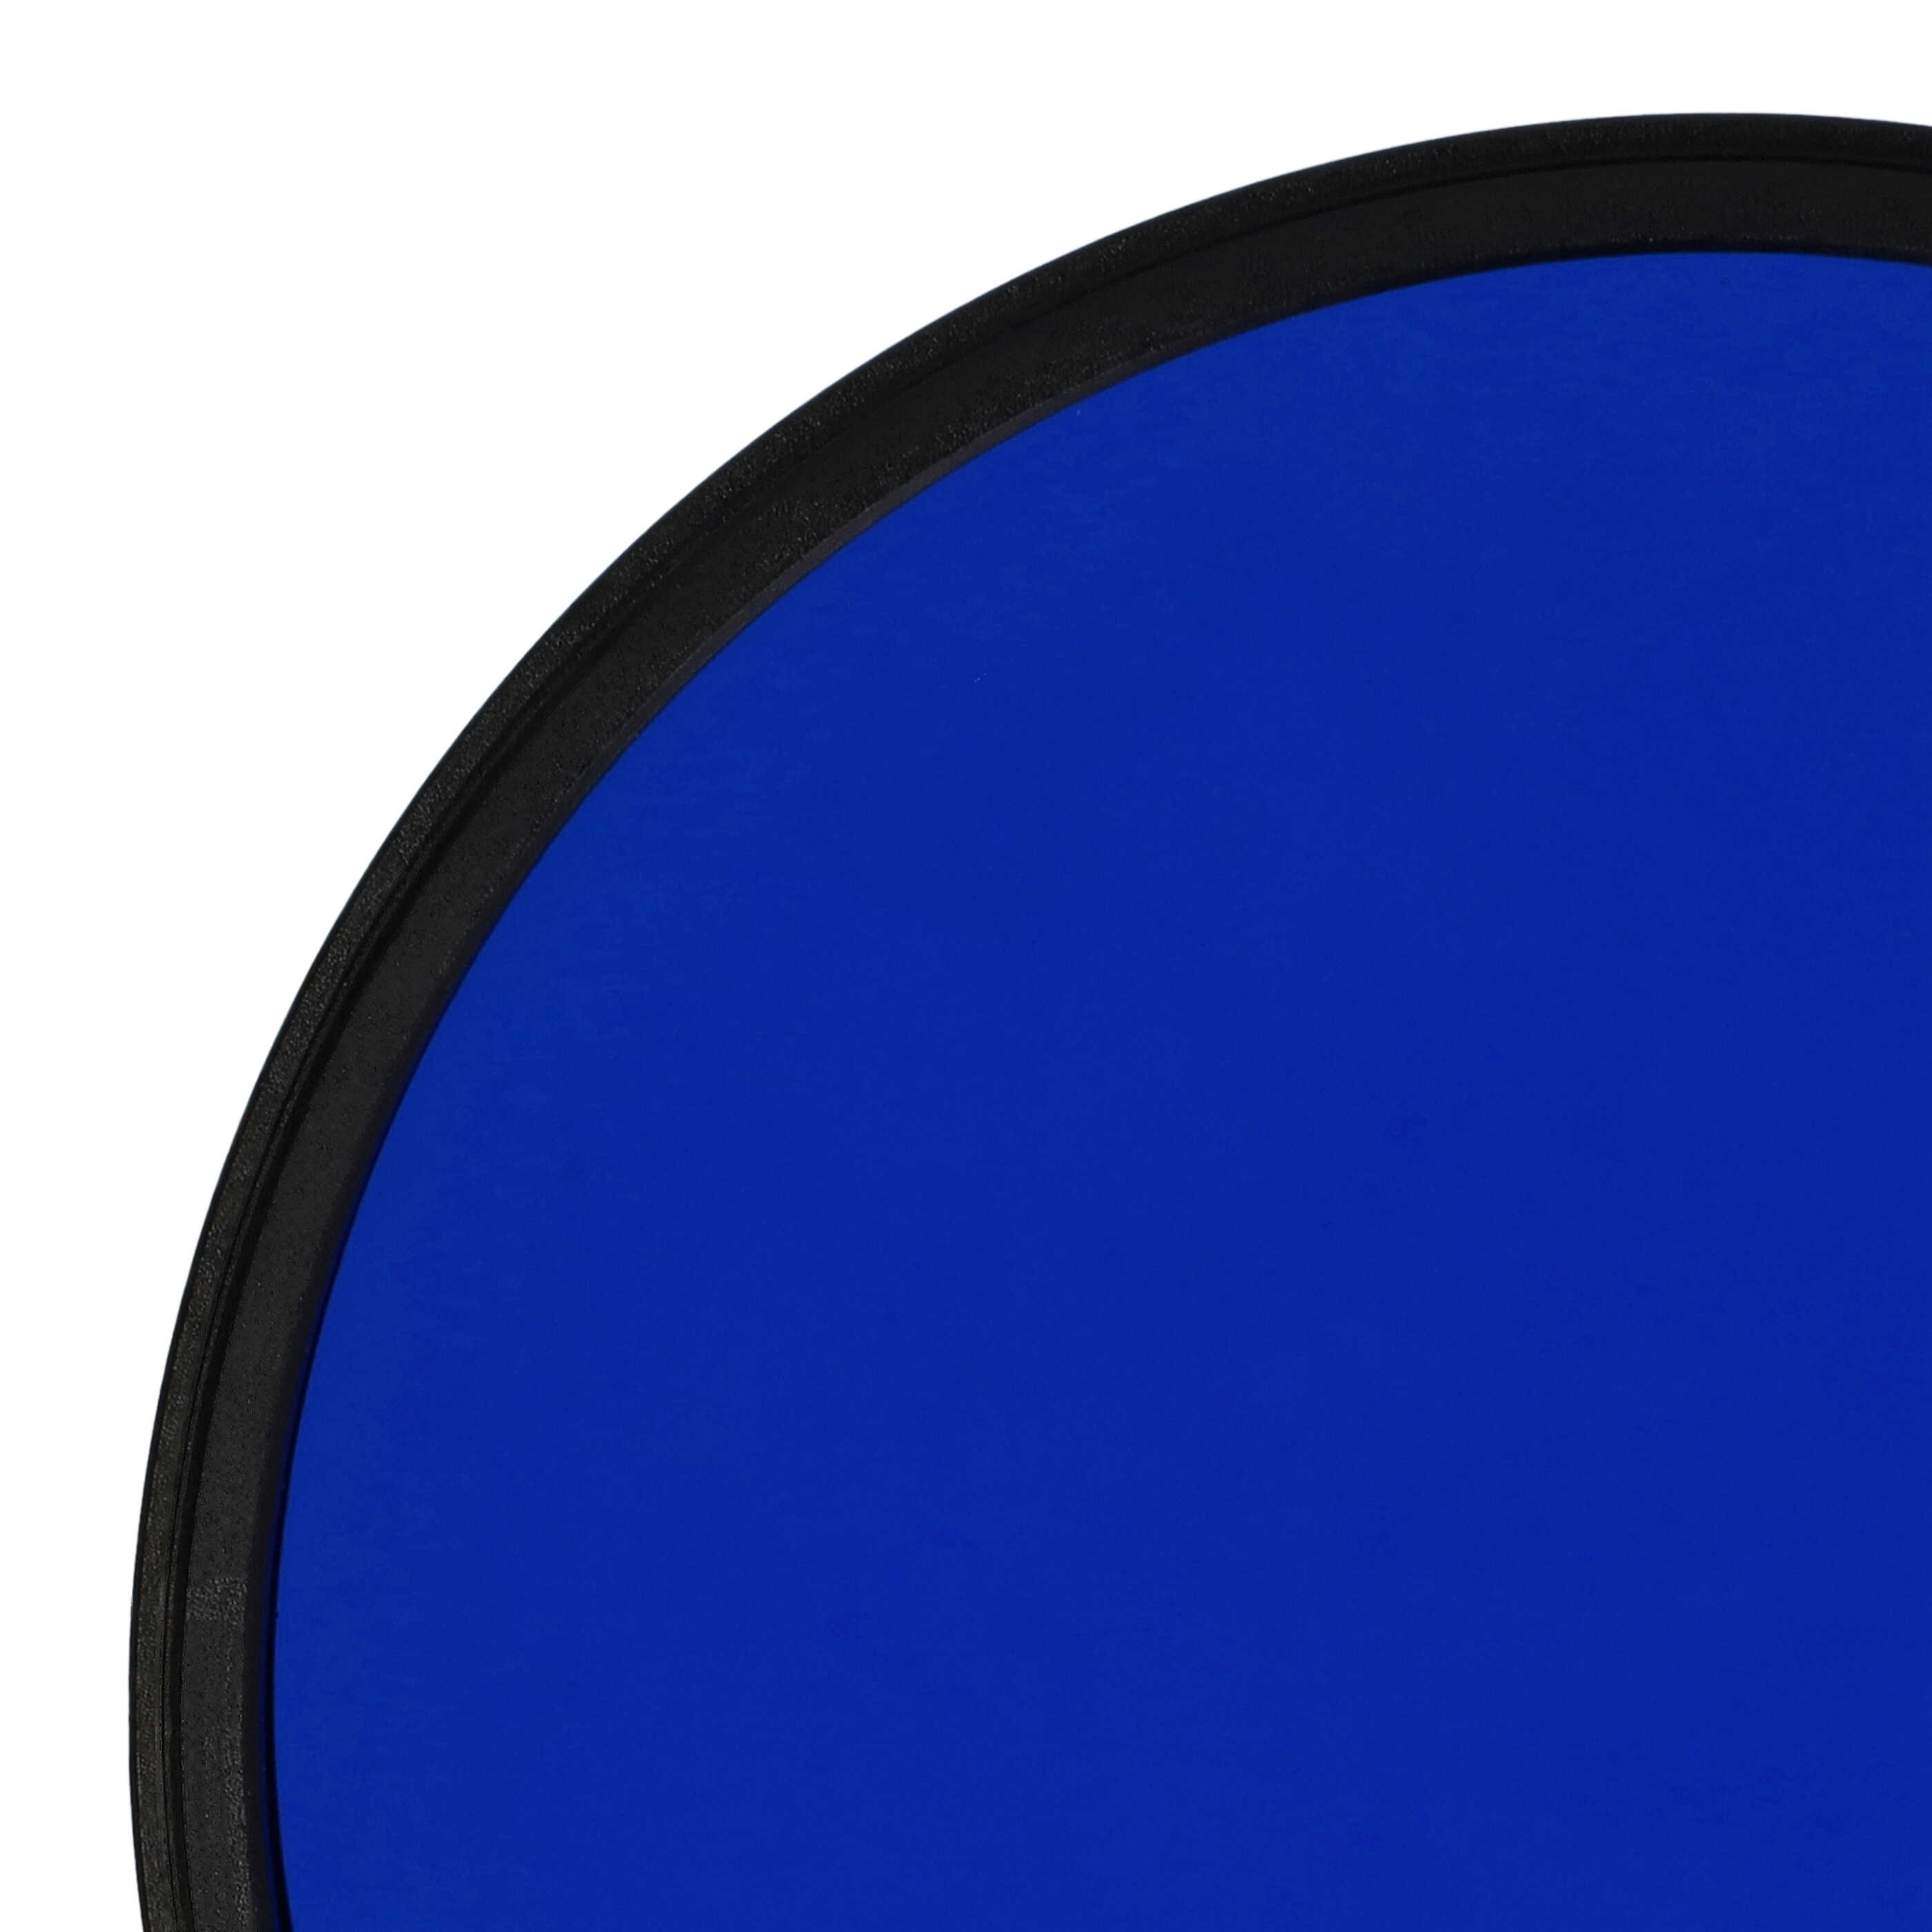 Coloured Filter, Blue suitable for Camera Lenses with 77 mm Filter Thread - Blue Filter